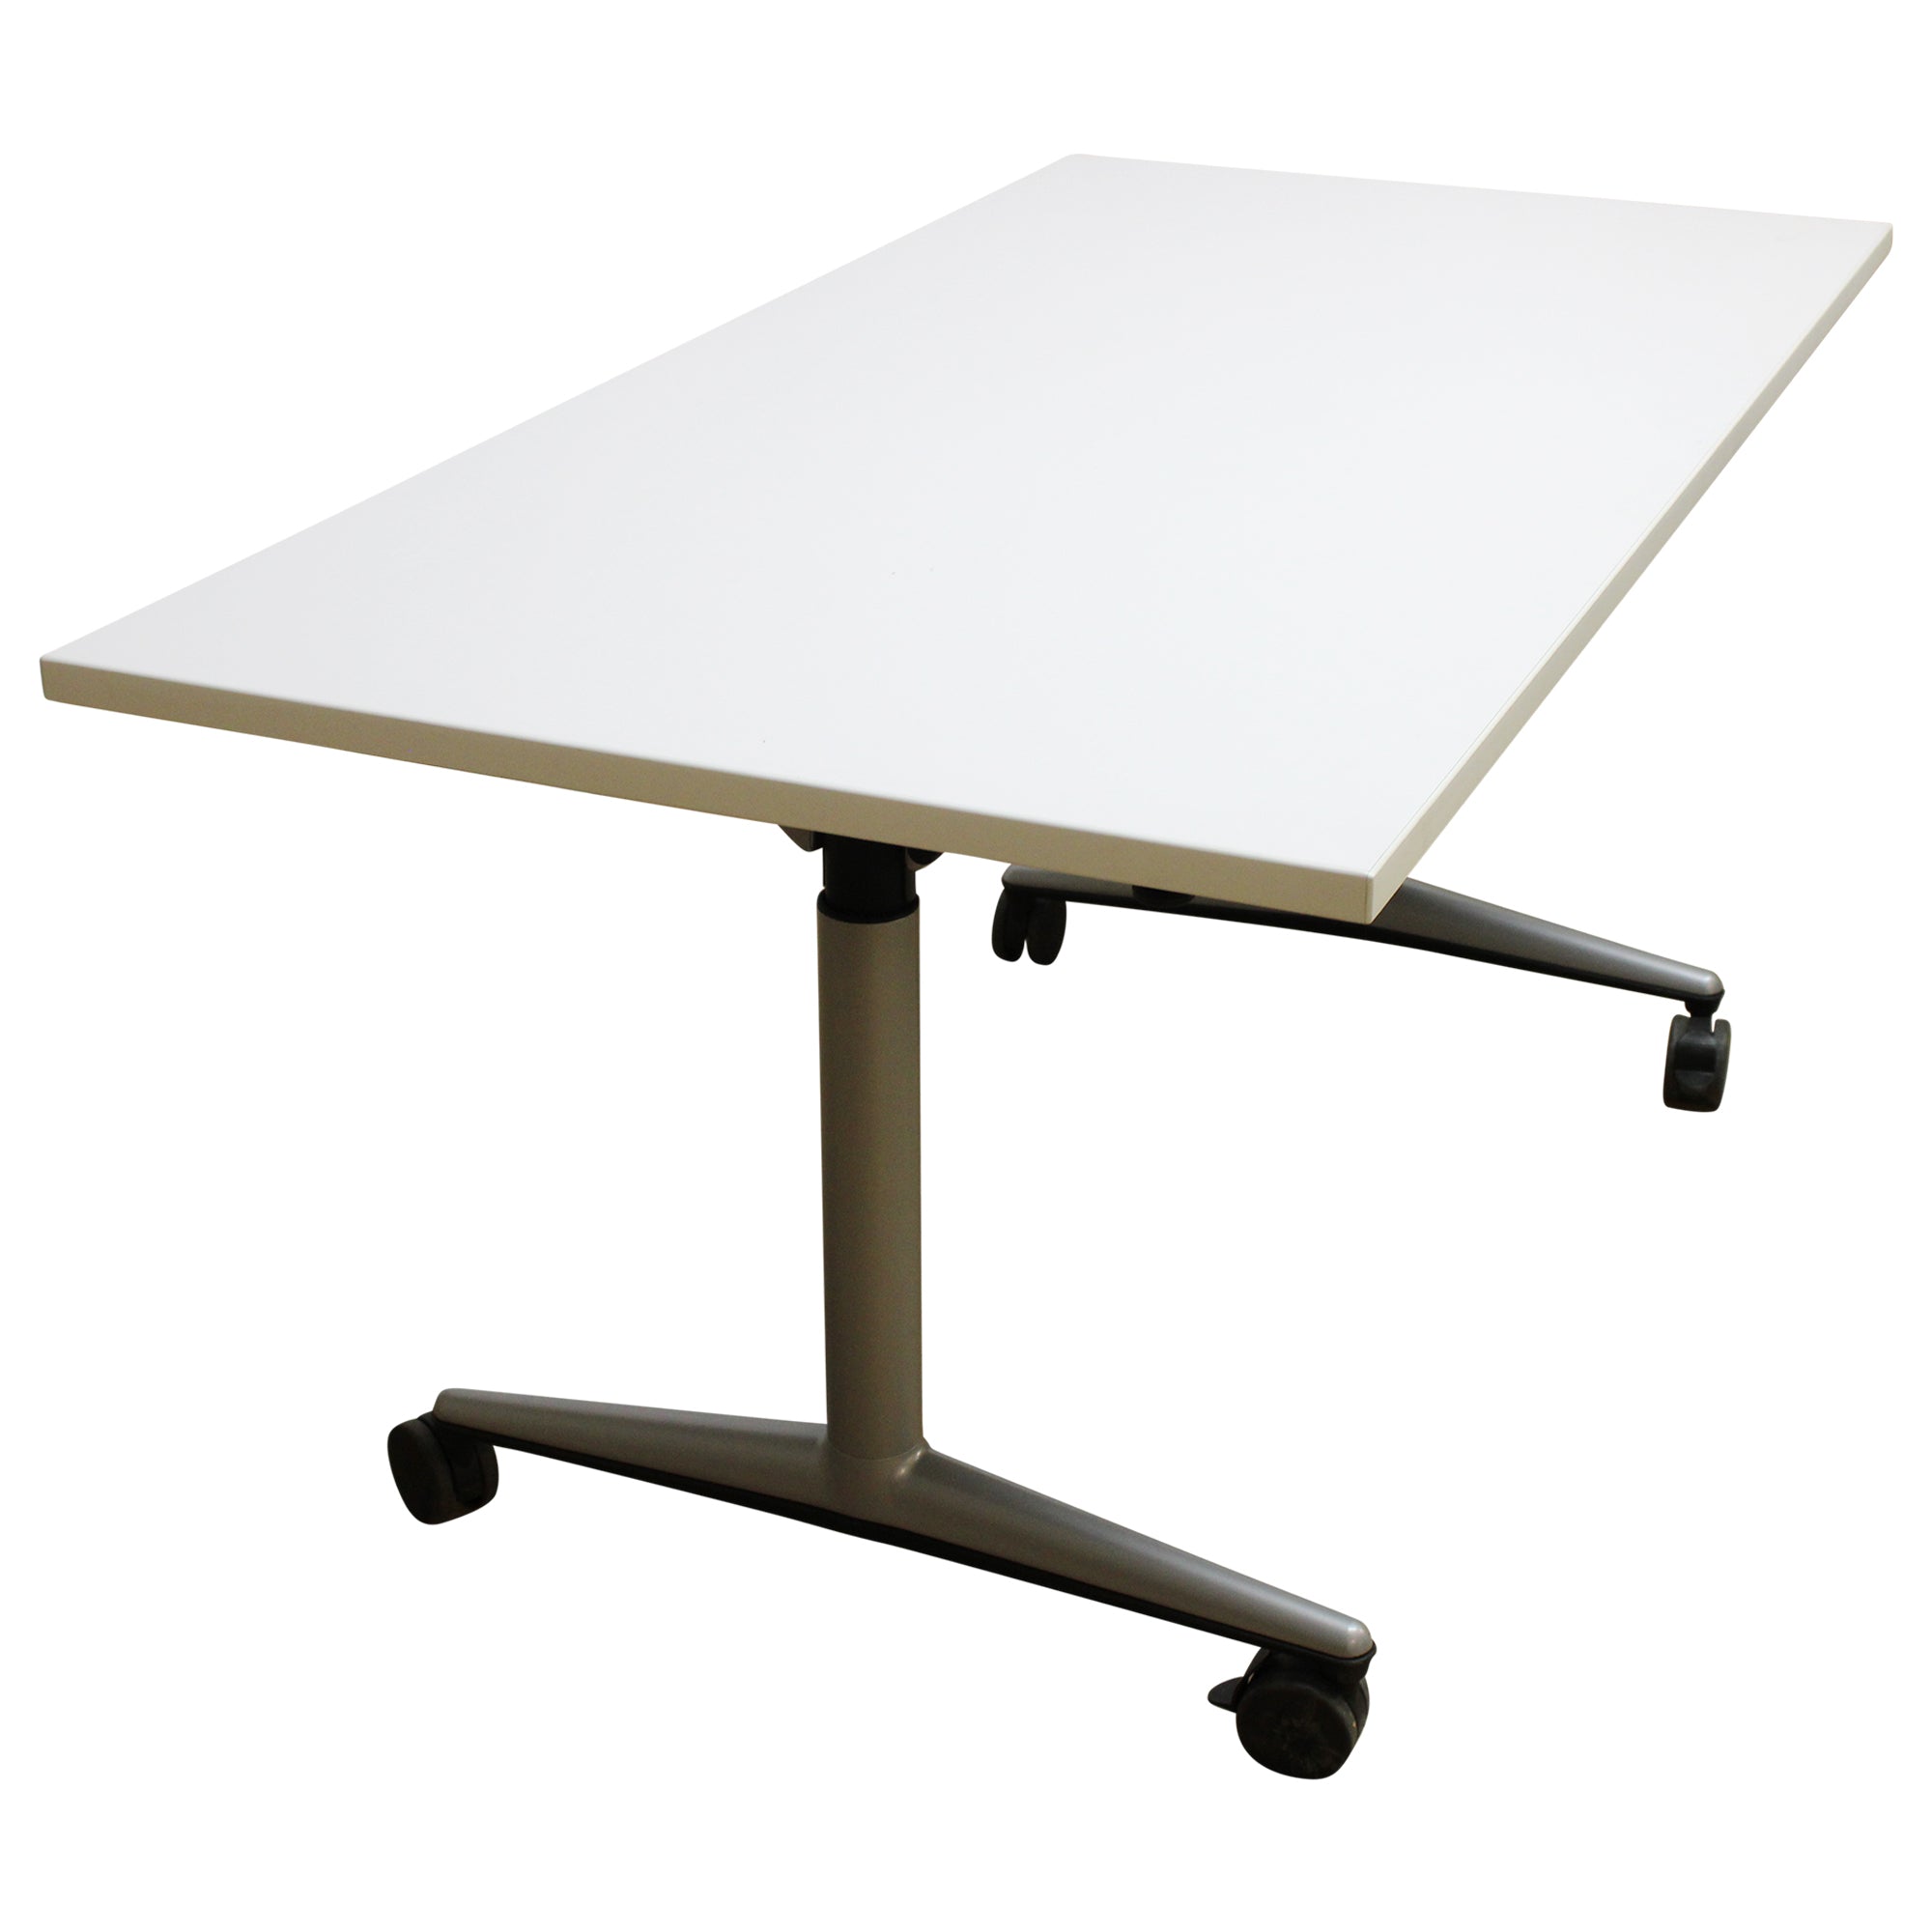 Steelcase Nesting Table, 30 x 60 - Silver Base - Preowned